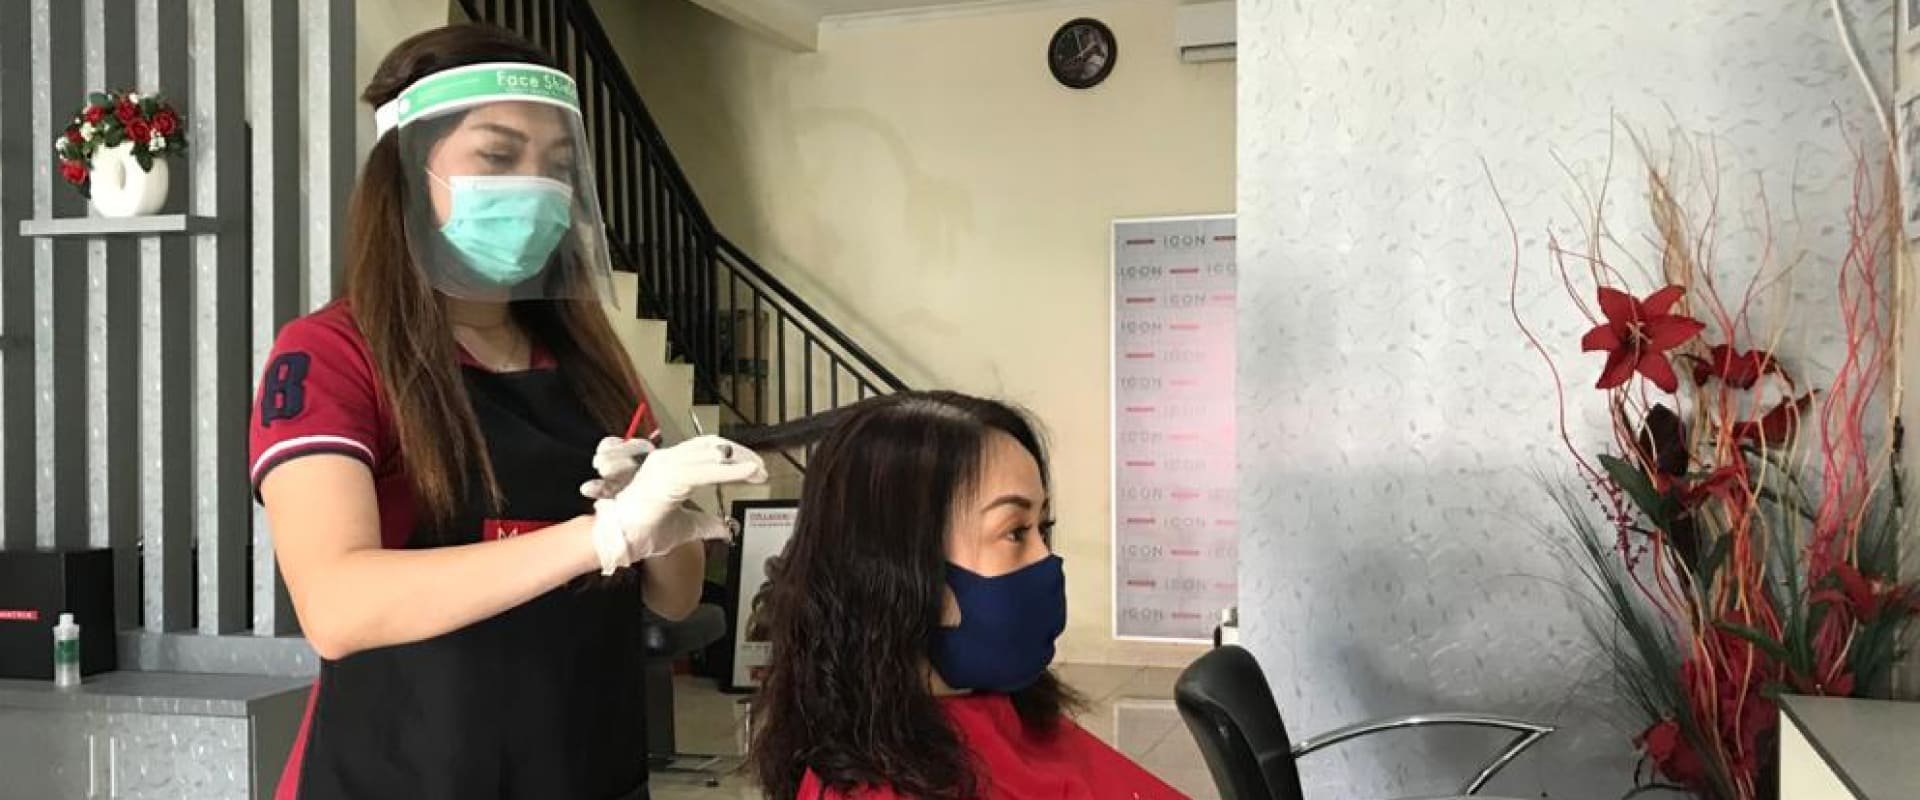 L'Oréal Together With Salon Industry Communities & Entrepreneurs Apply Strict Security And Safety Standards During Pandemic